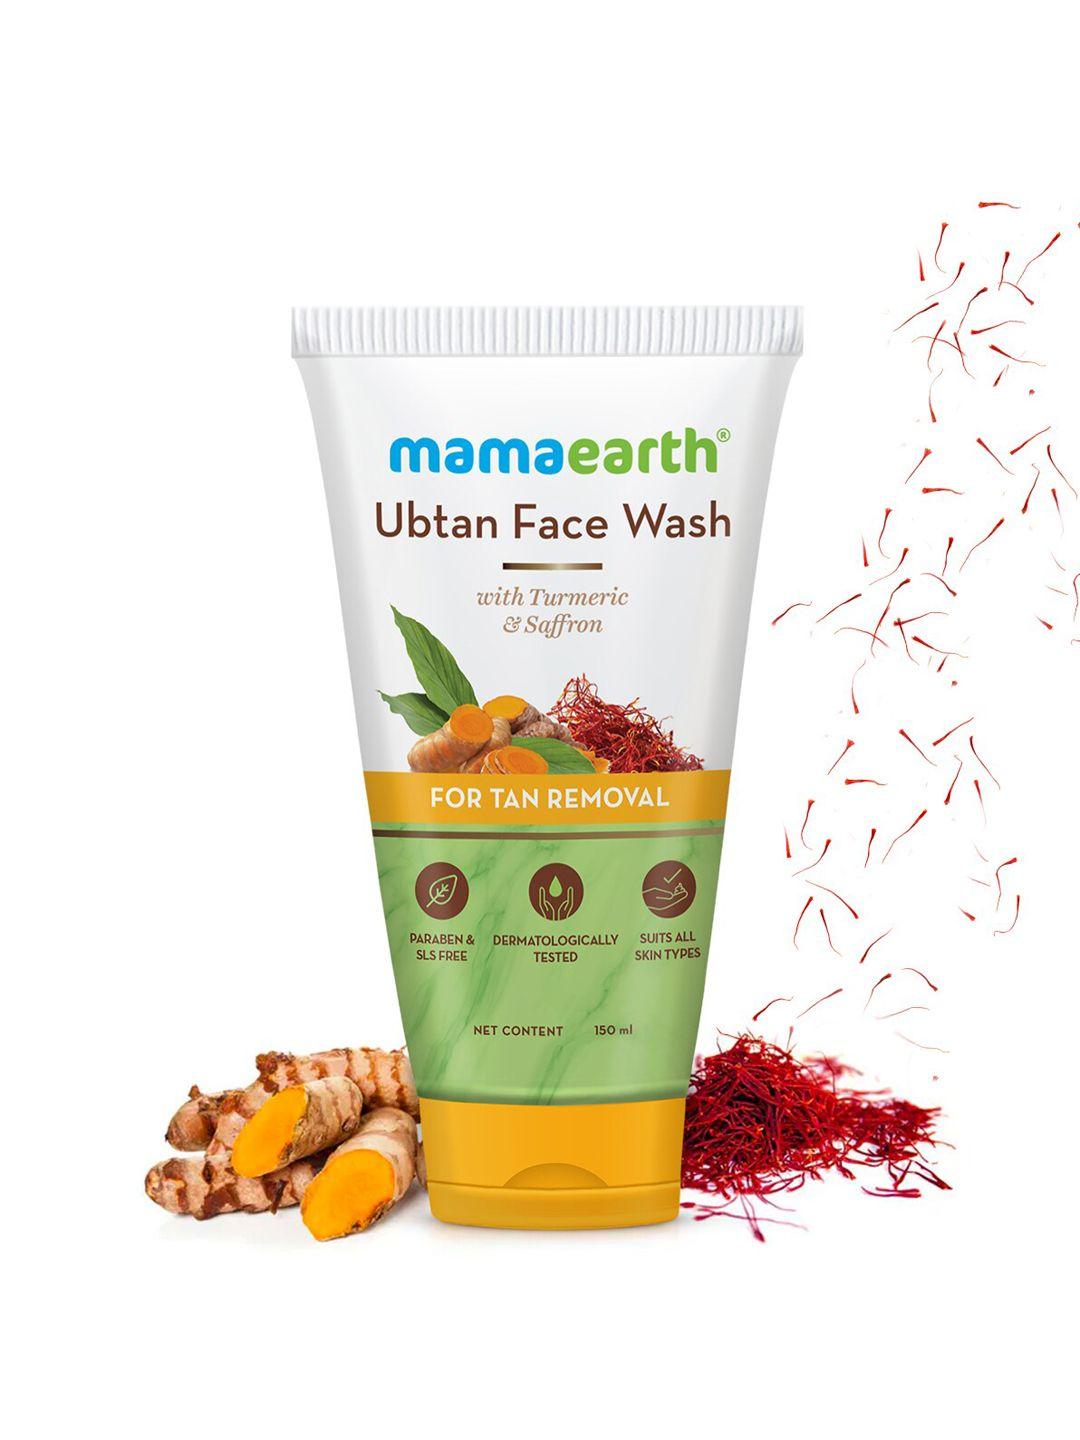 mamaearth-ubtan-face-wash-with-turmeric-&-saffron-for-tan-removal---150ml